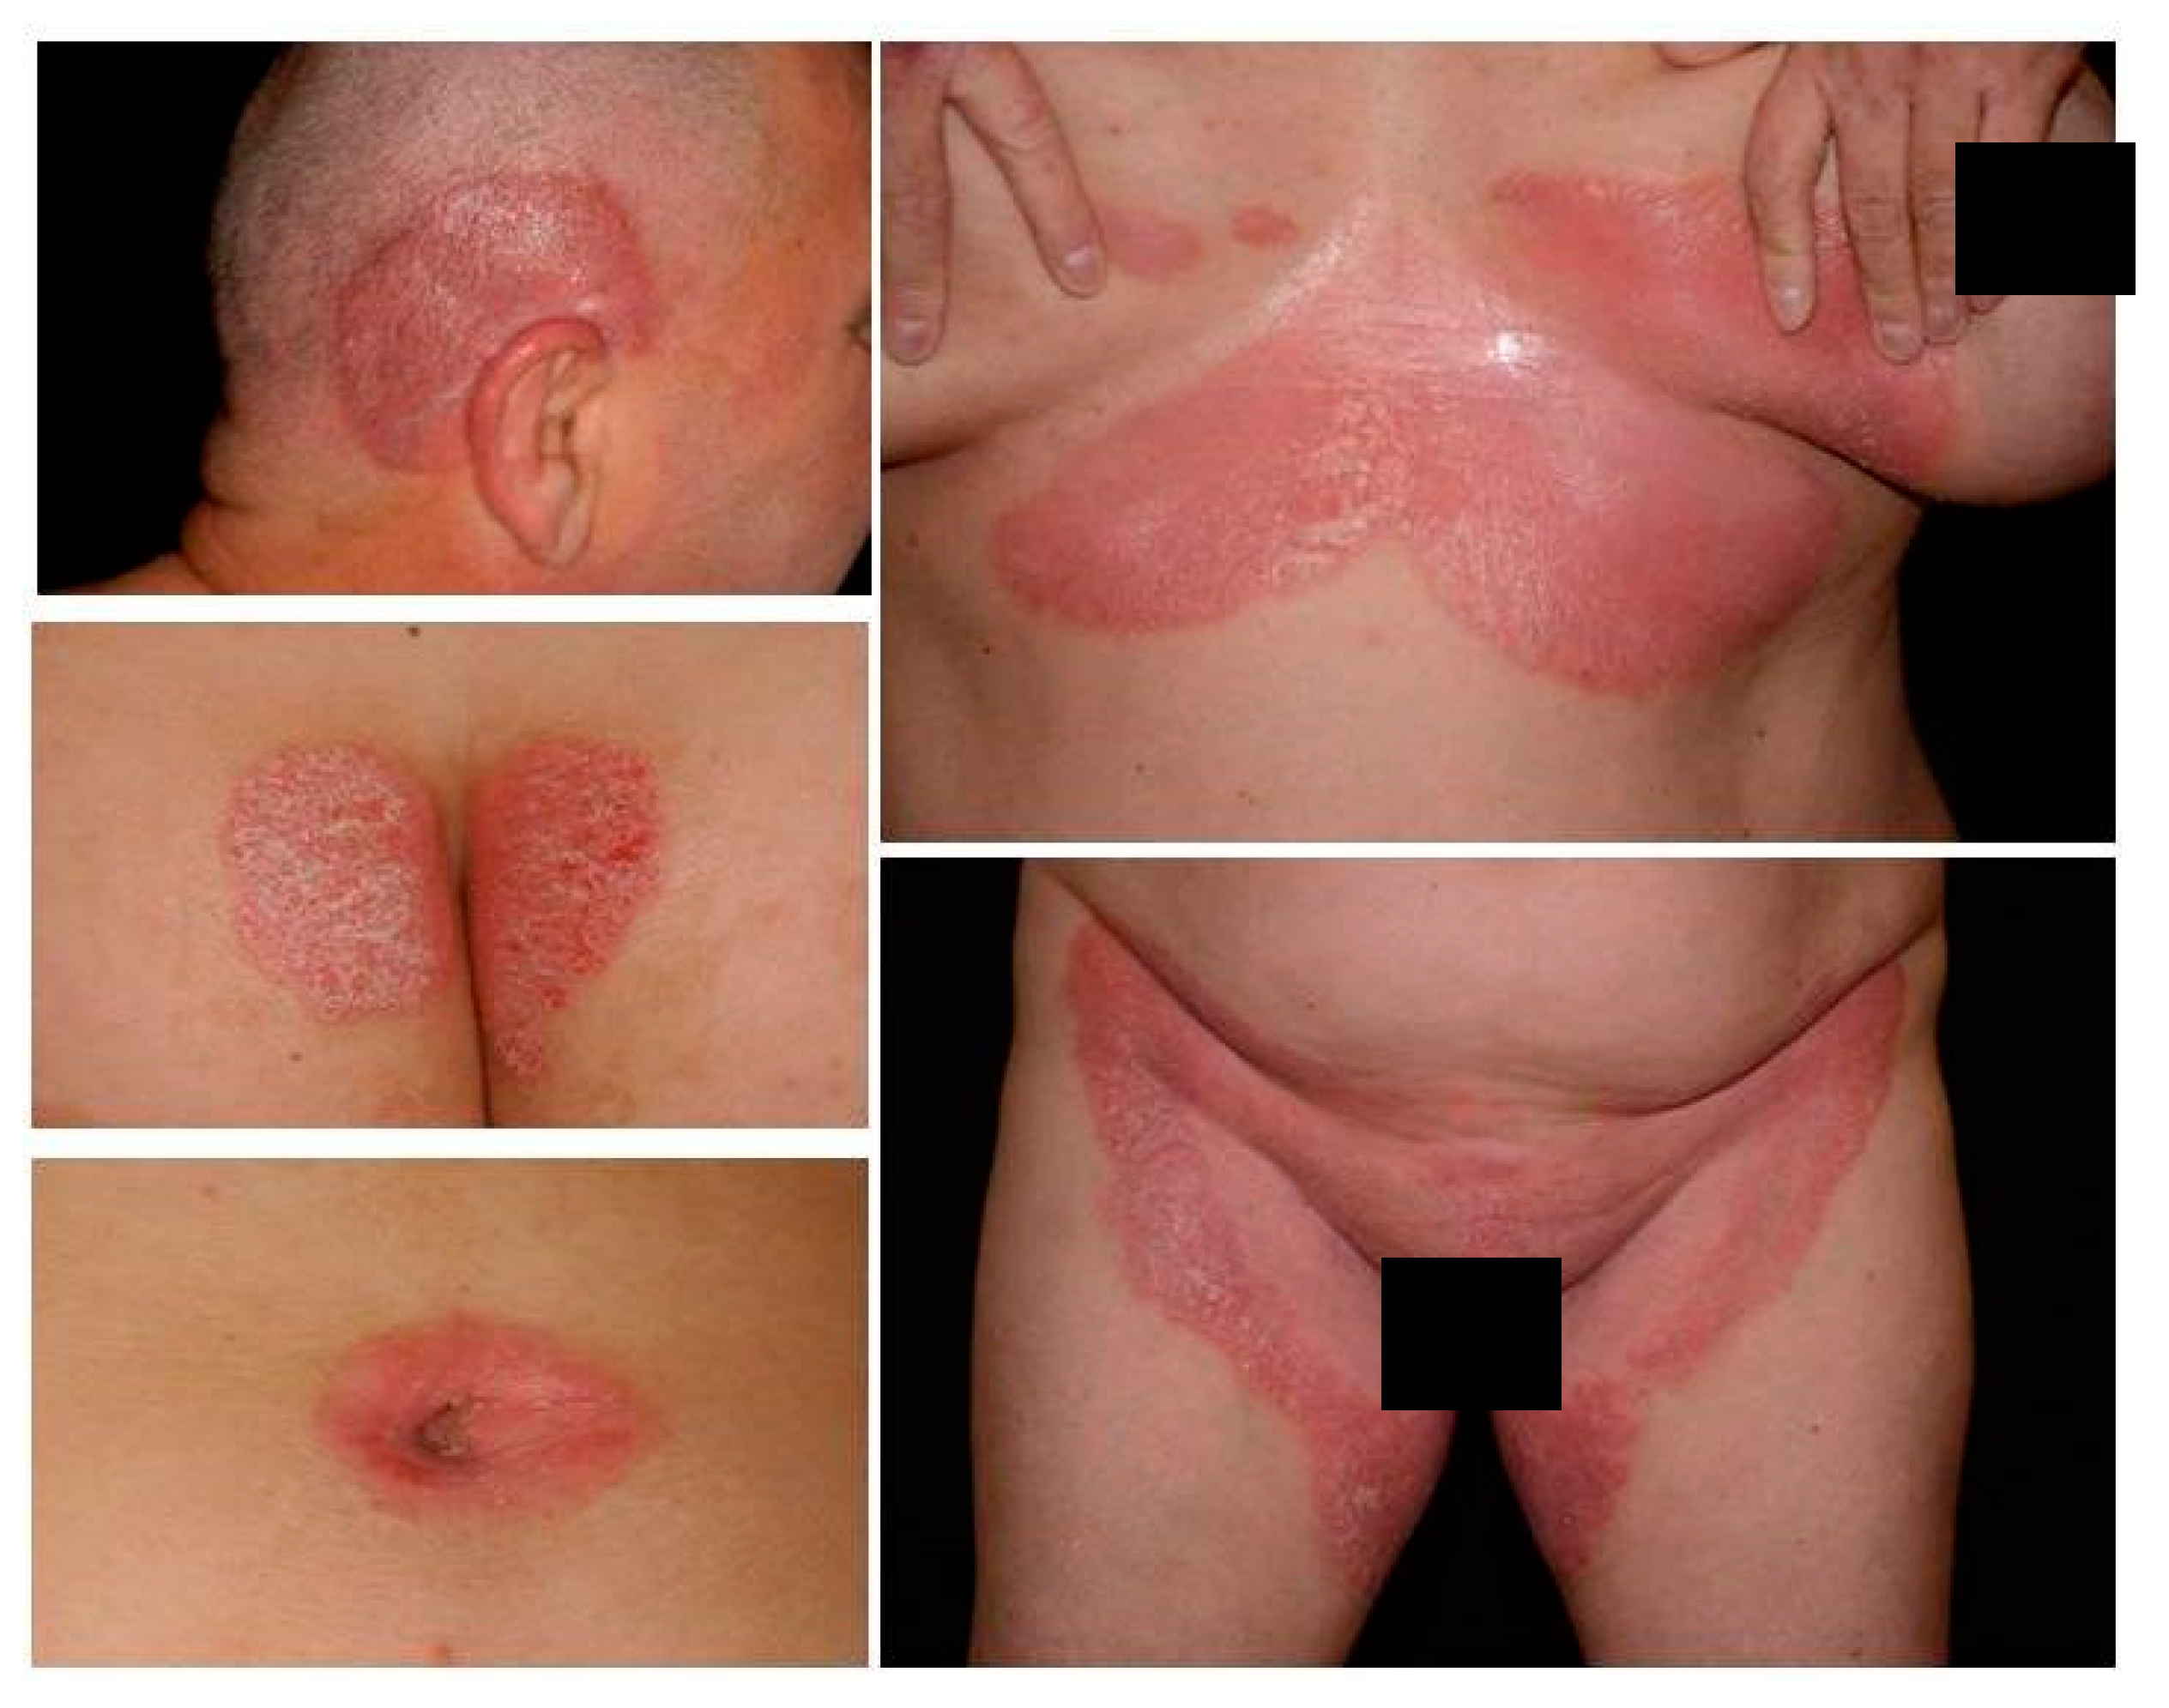 clinical presentation of inverse psoriasis